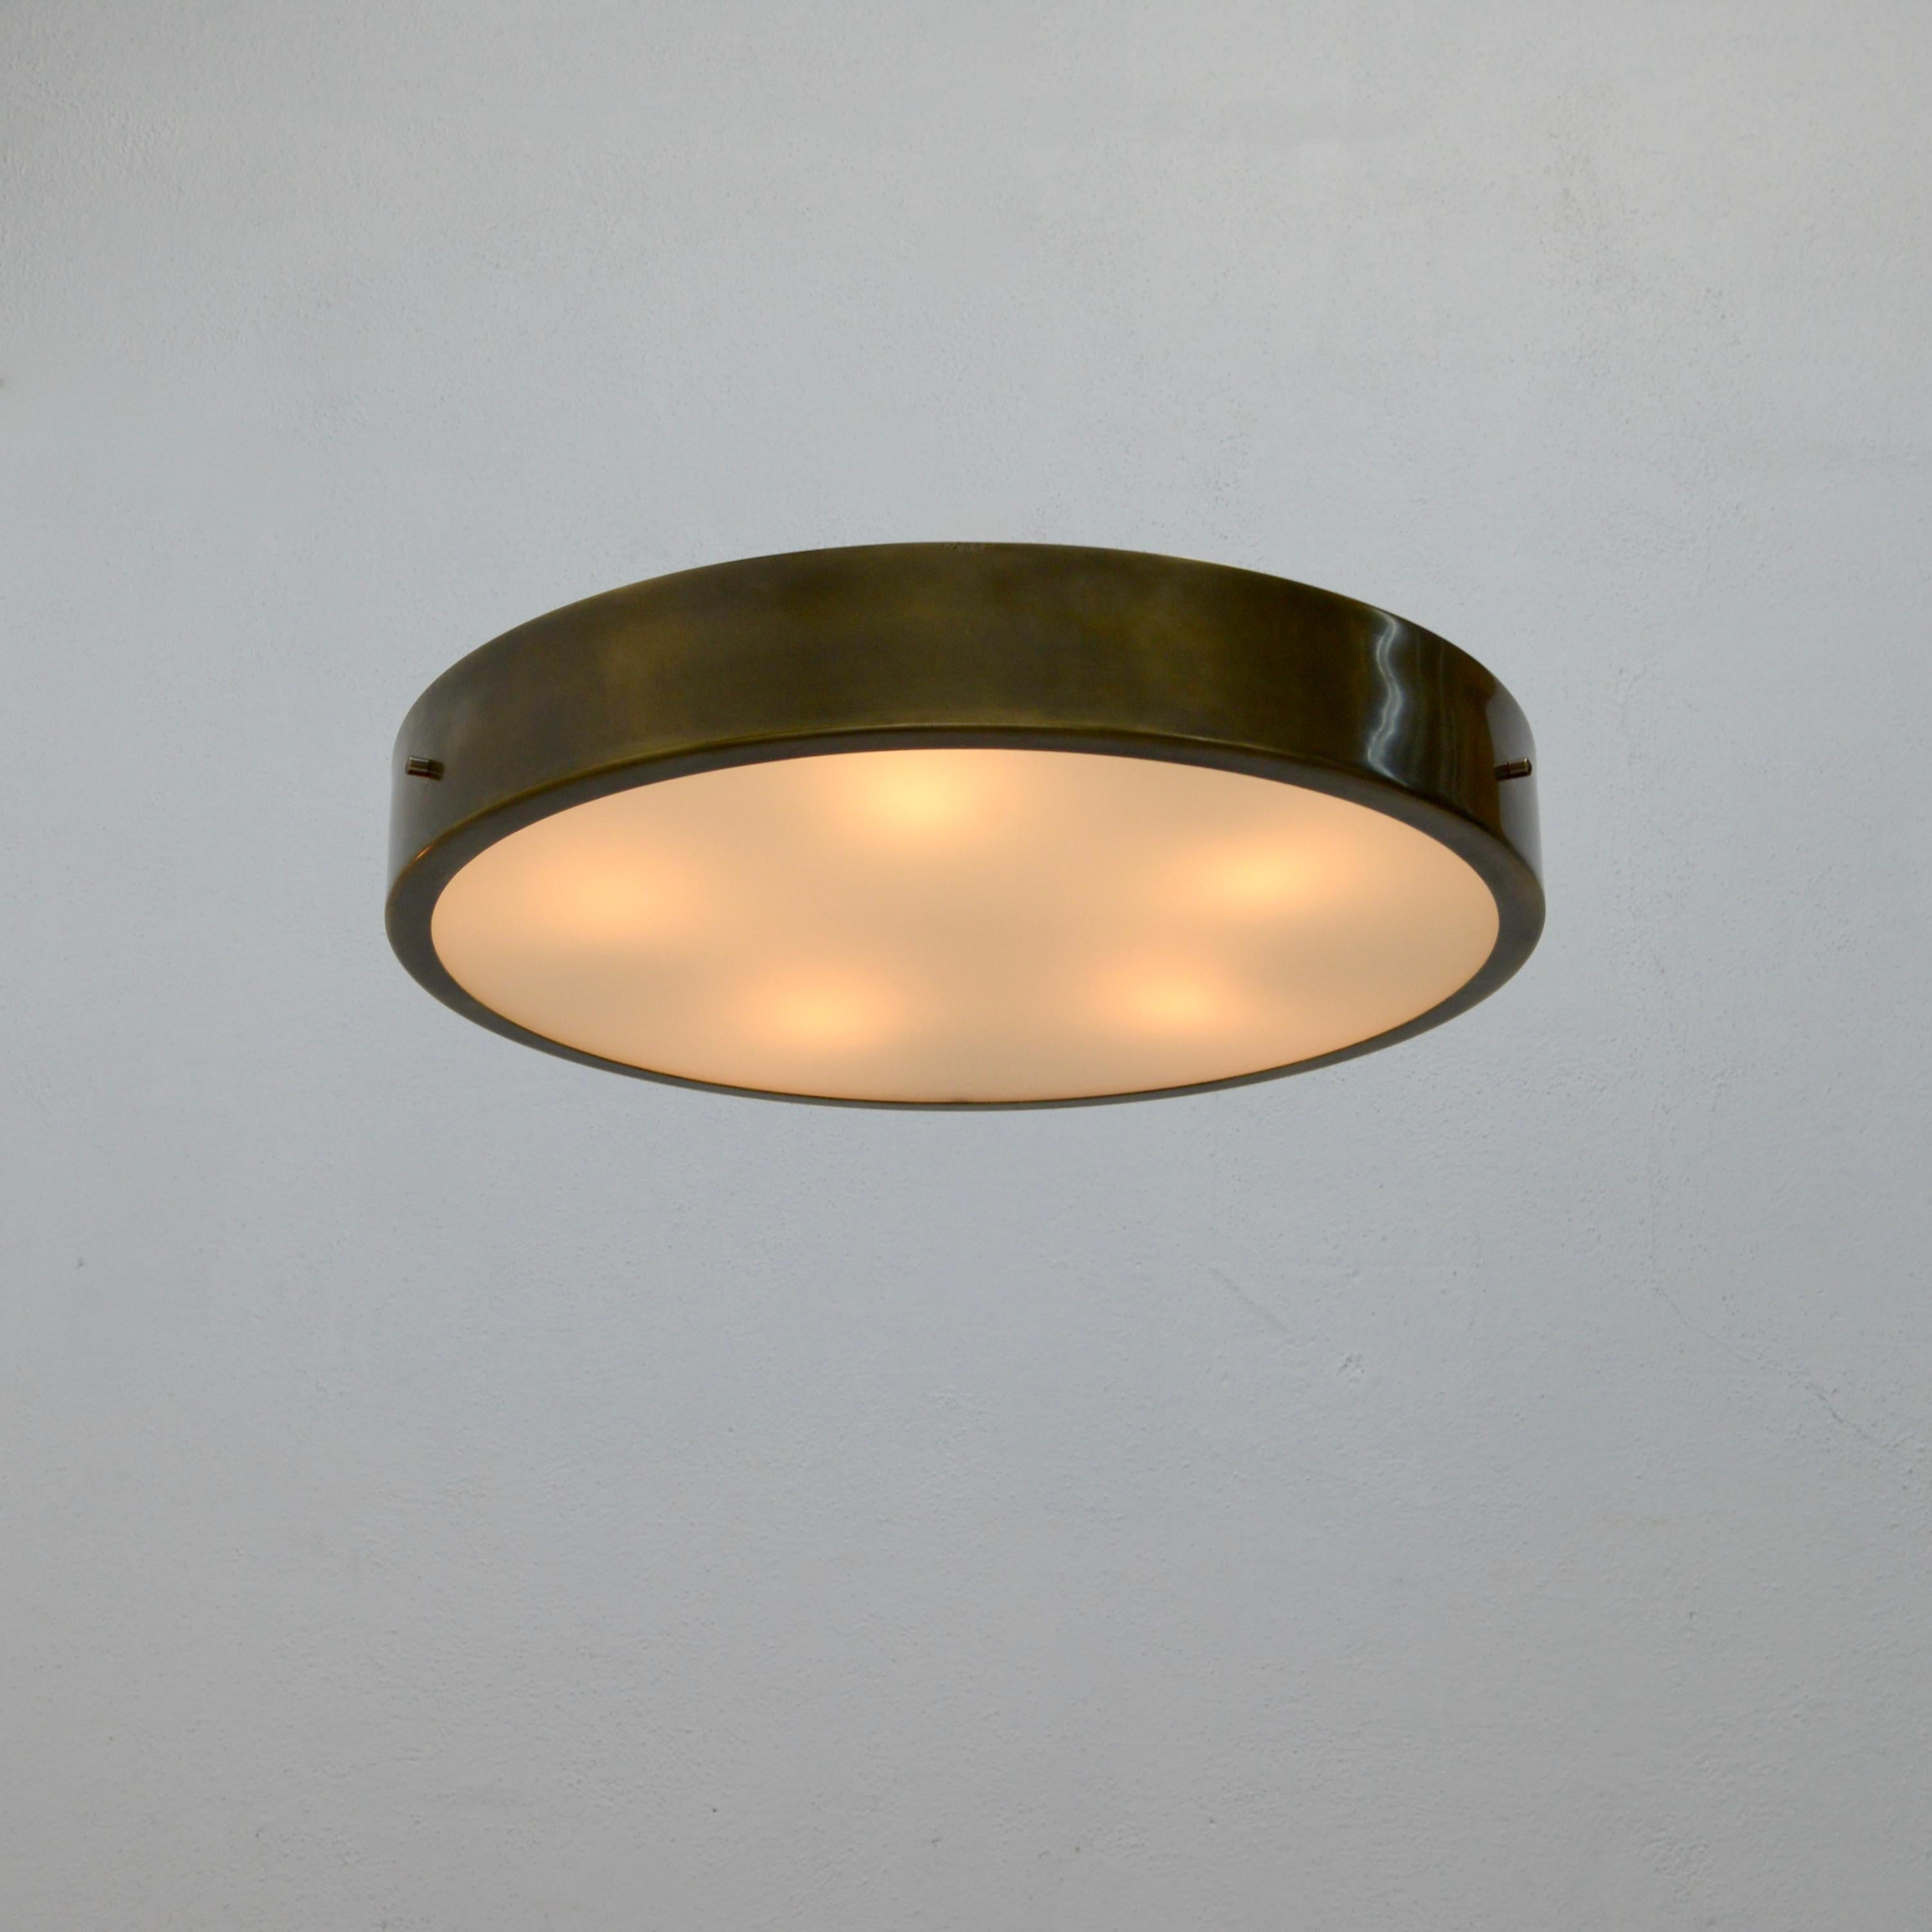 TLUnnel is a simple effective circular flush mount design. Modern in nature yet Classic vintage light source set up. Made in brass, aluminum and glass. Also available in satin aged nickel finish. Wired with 5-E26 medium based sockets (24